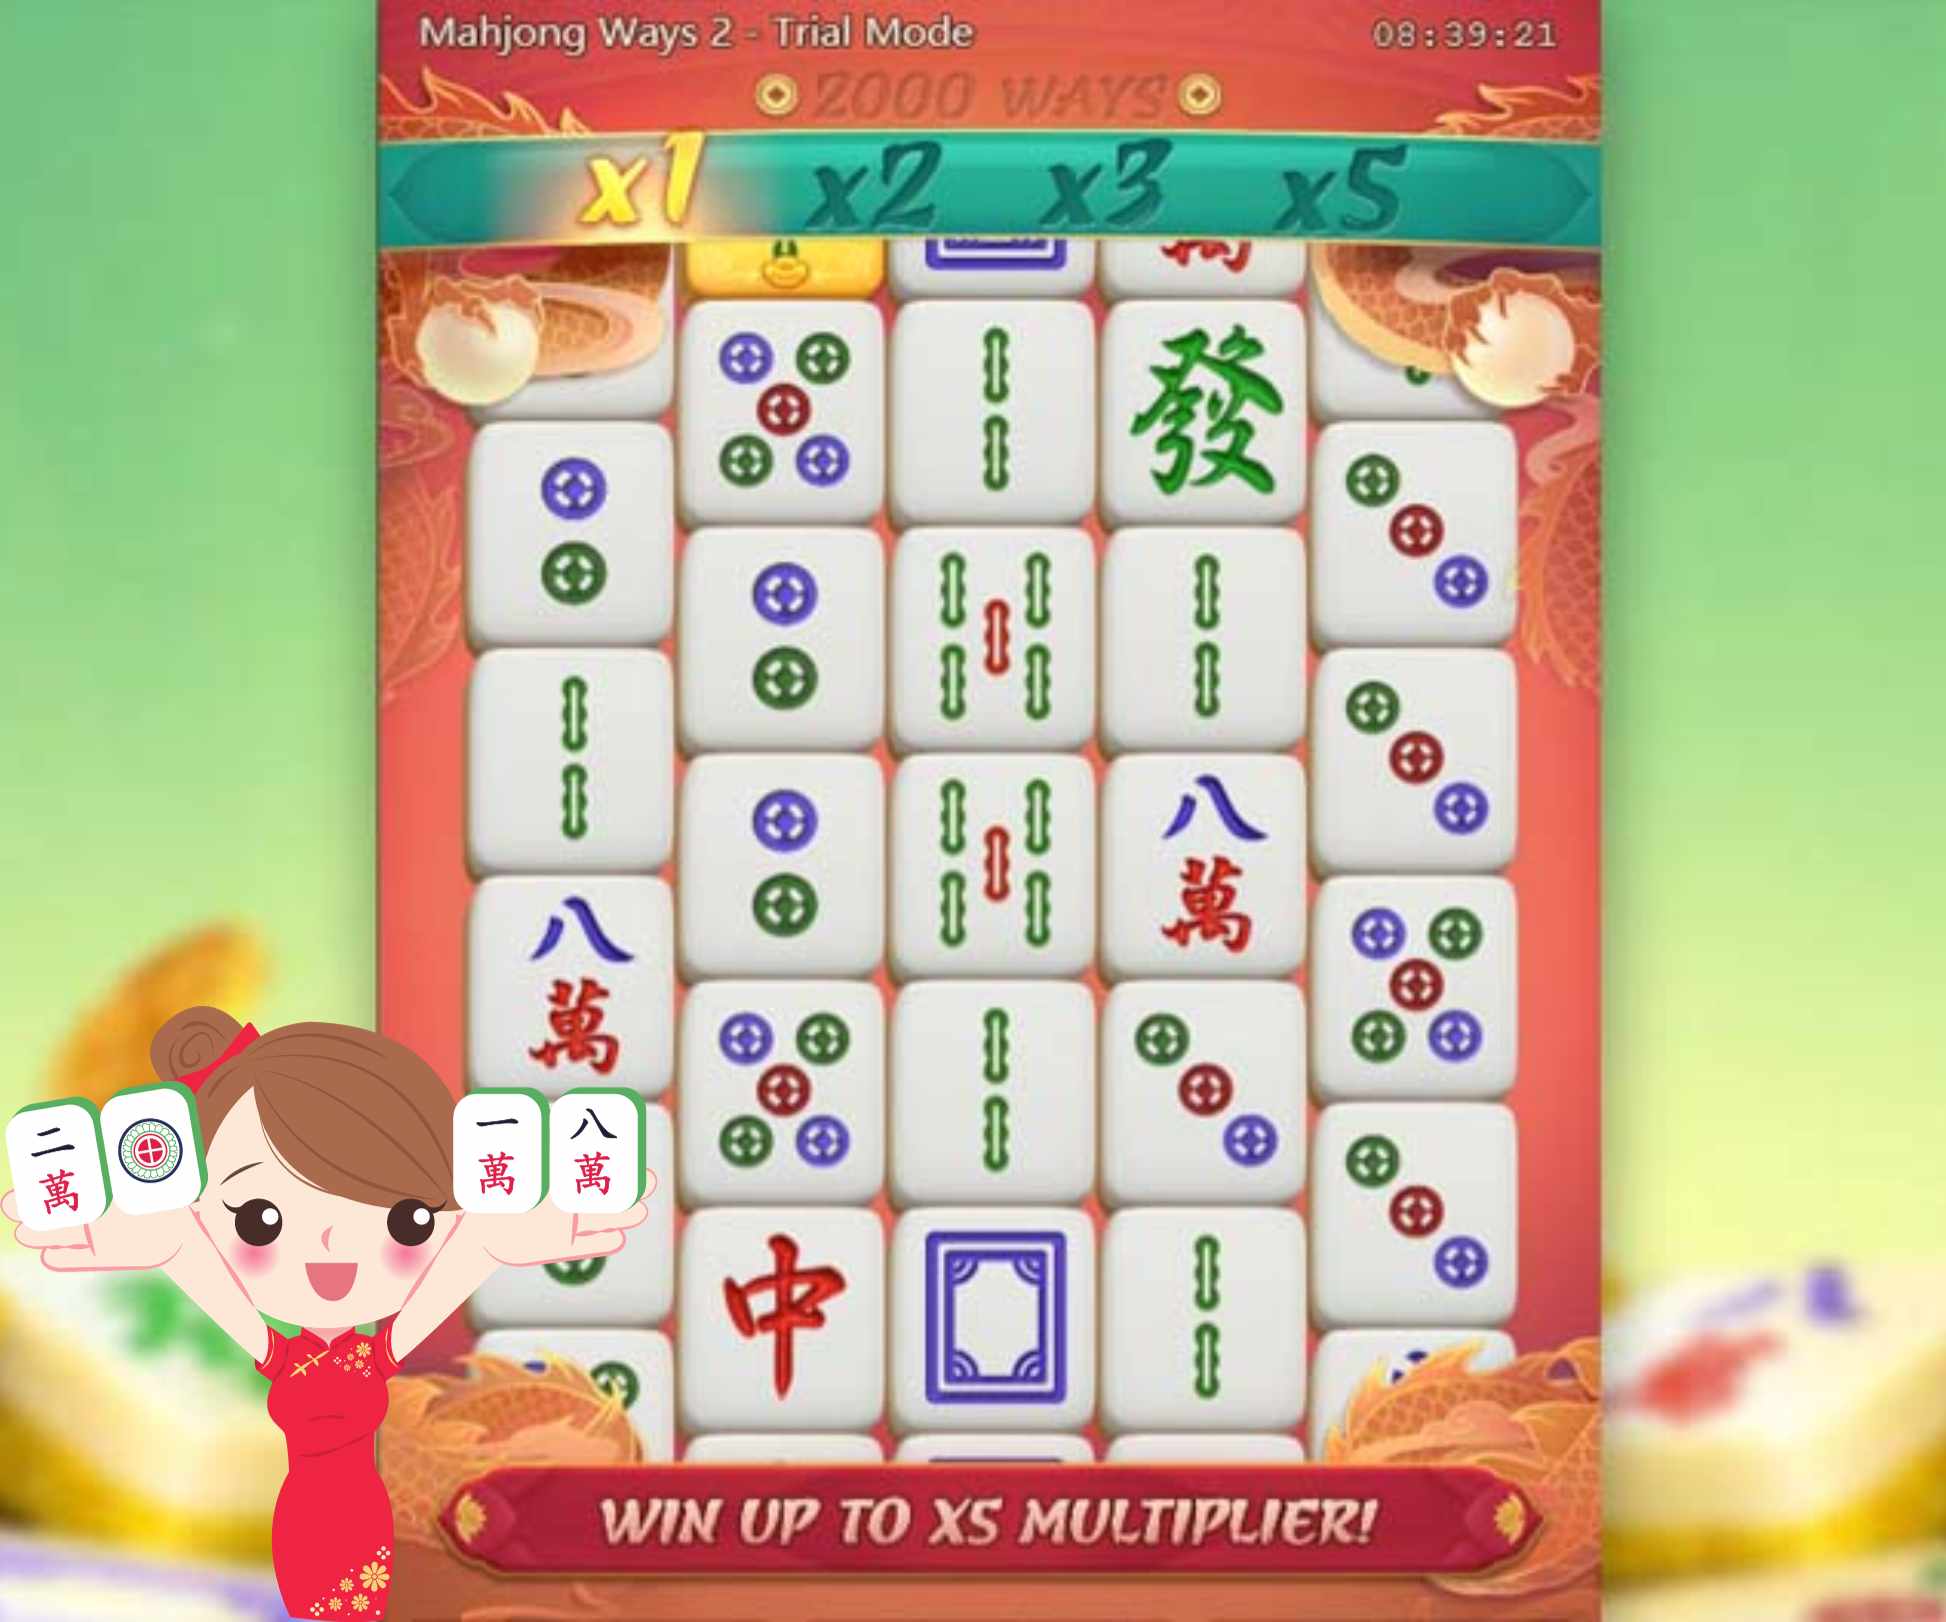 Why is Indonesia the best mahjong slot market?